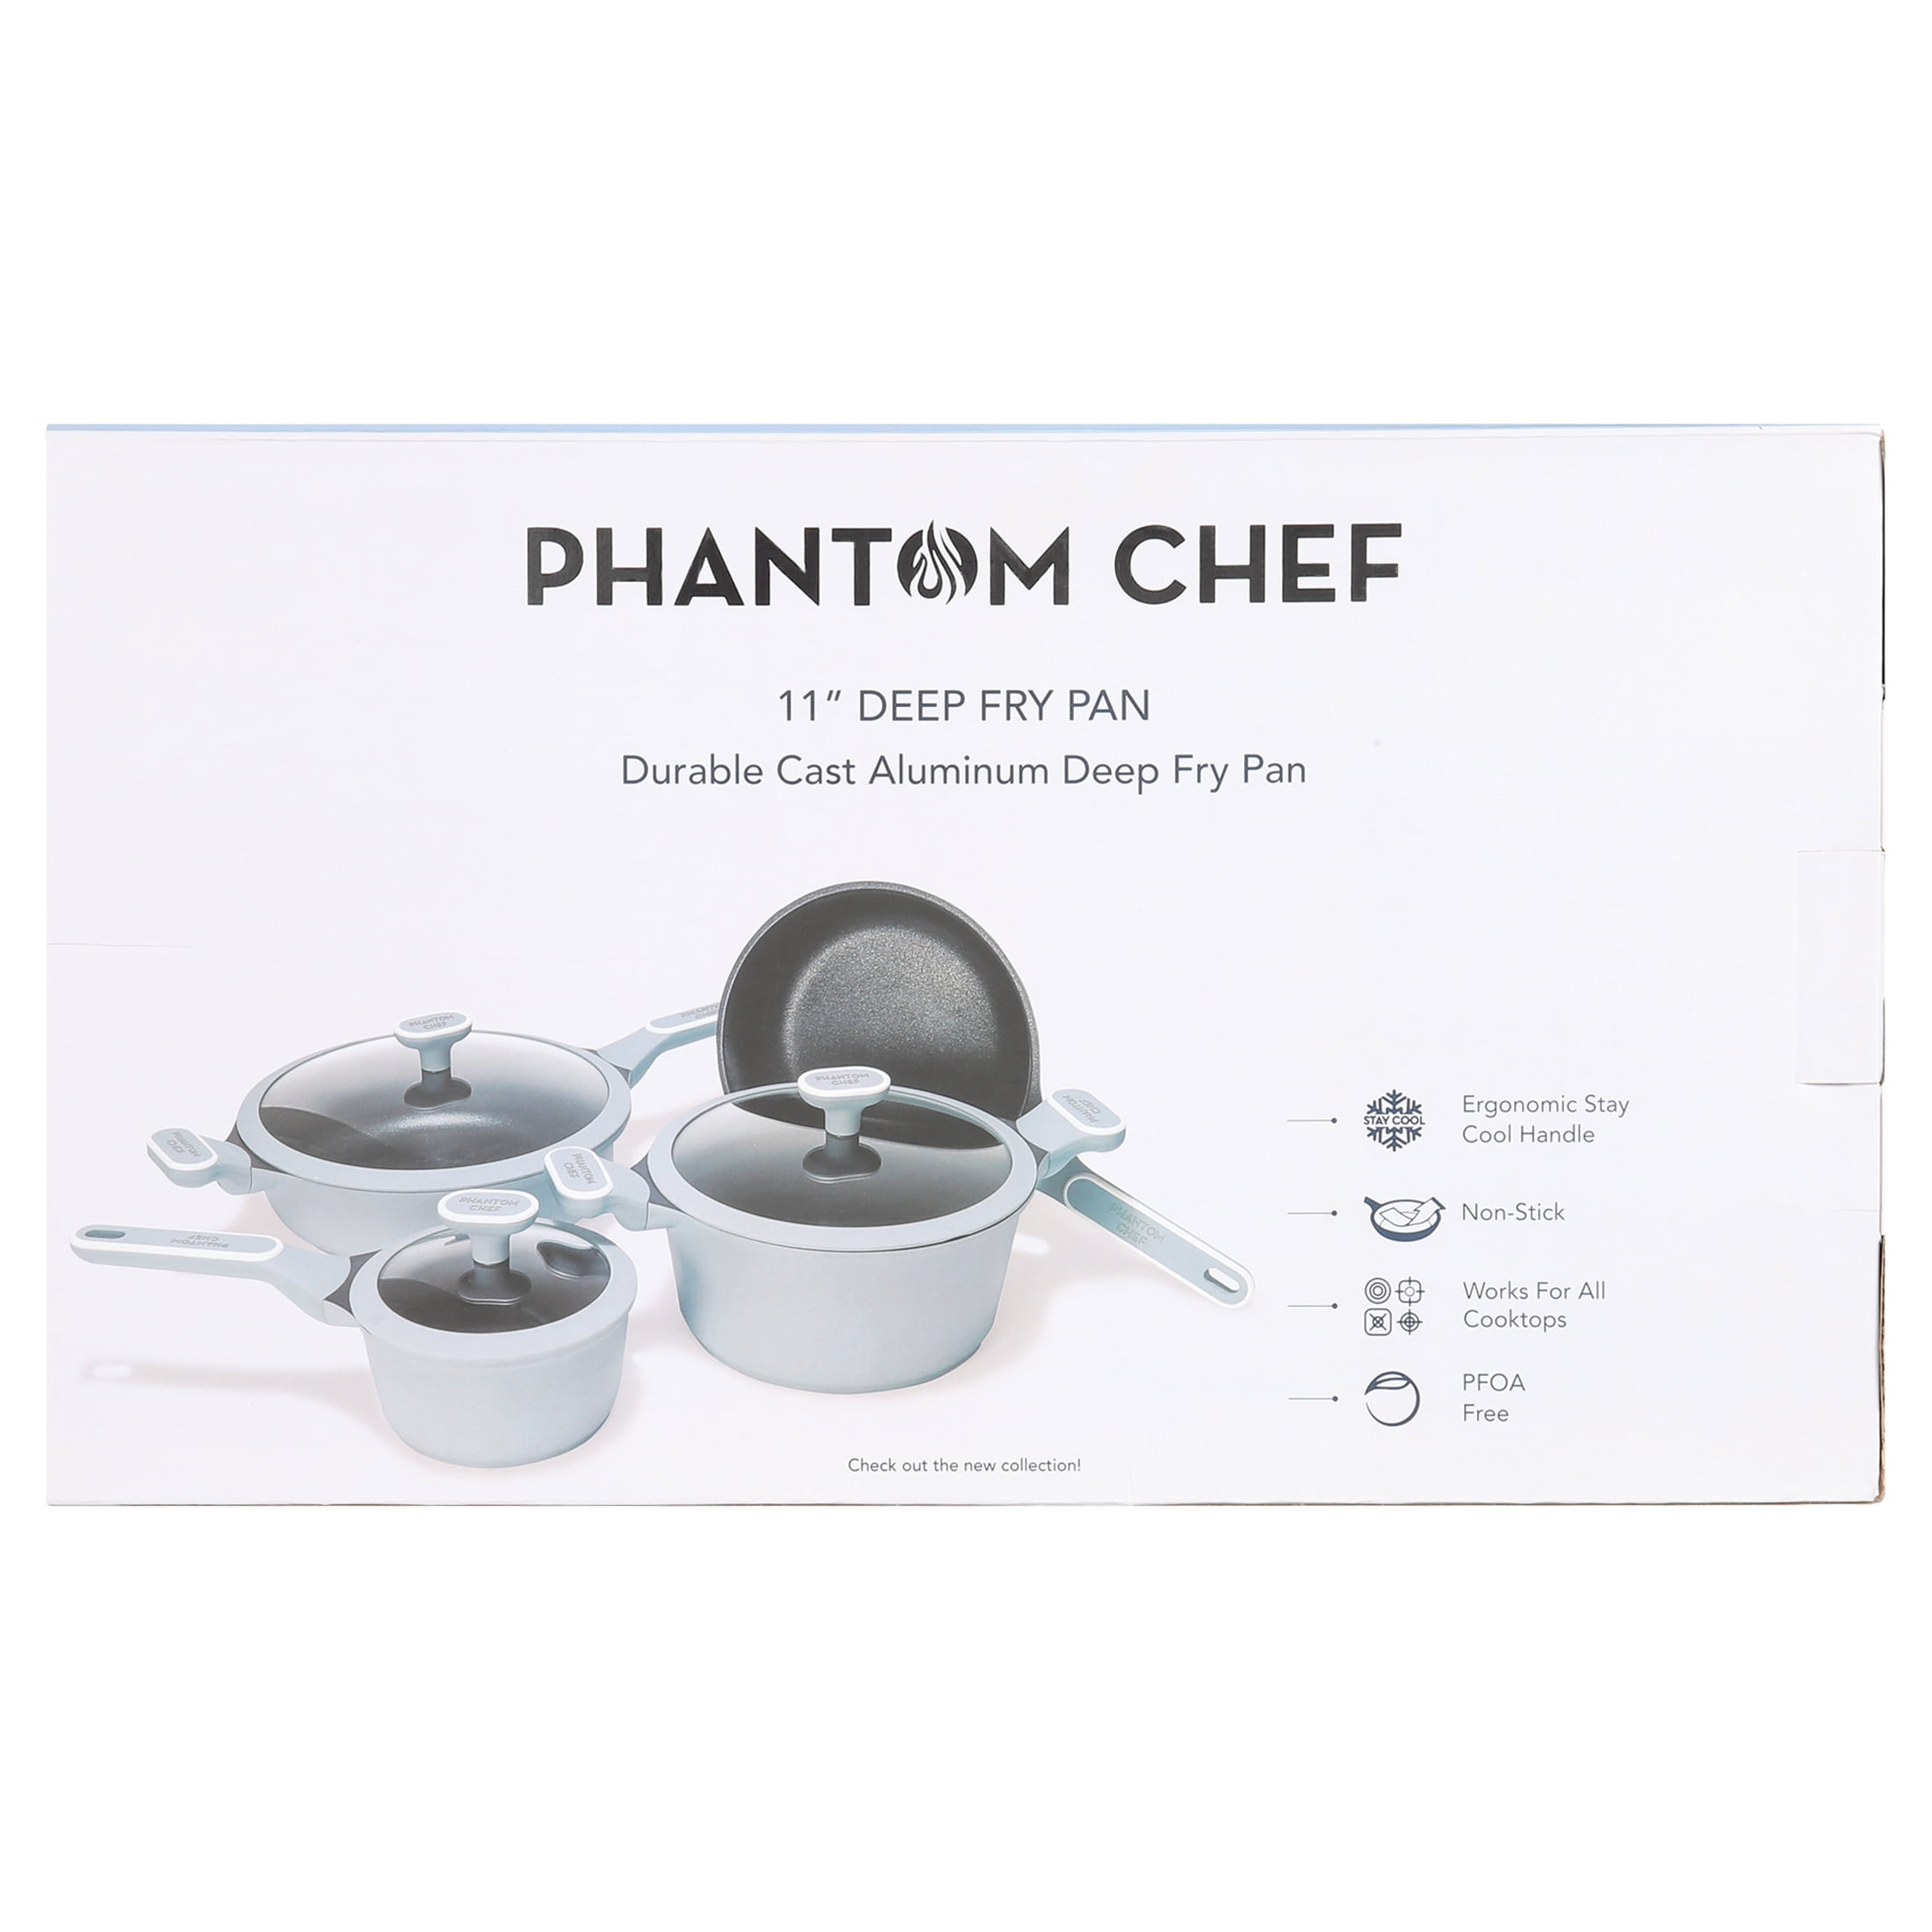 Phantom Chef Cookware Product Review 